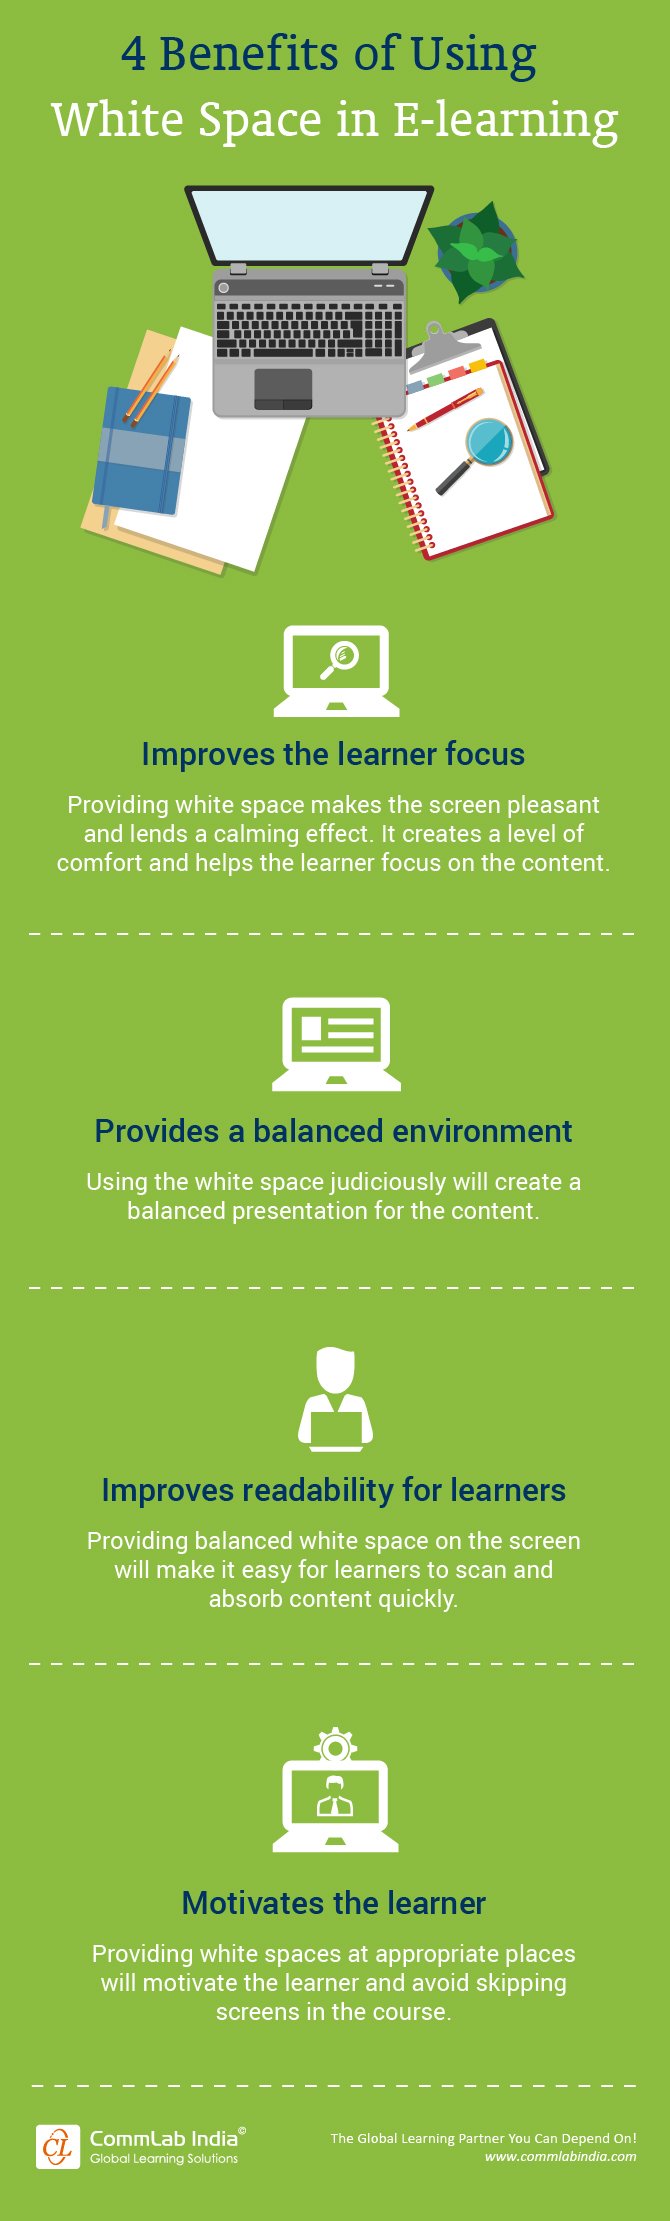 4 Benefits of Using White Space in E-learning [Infographic]